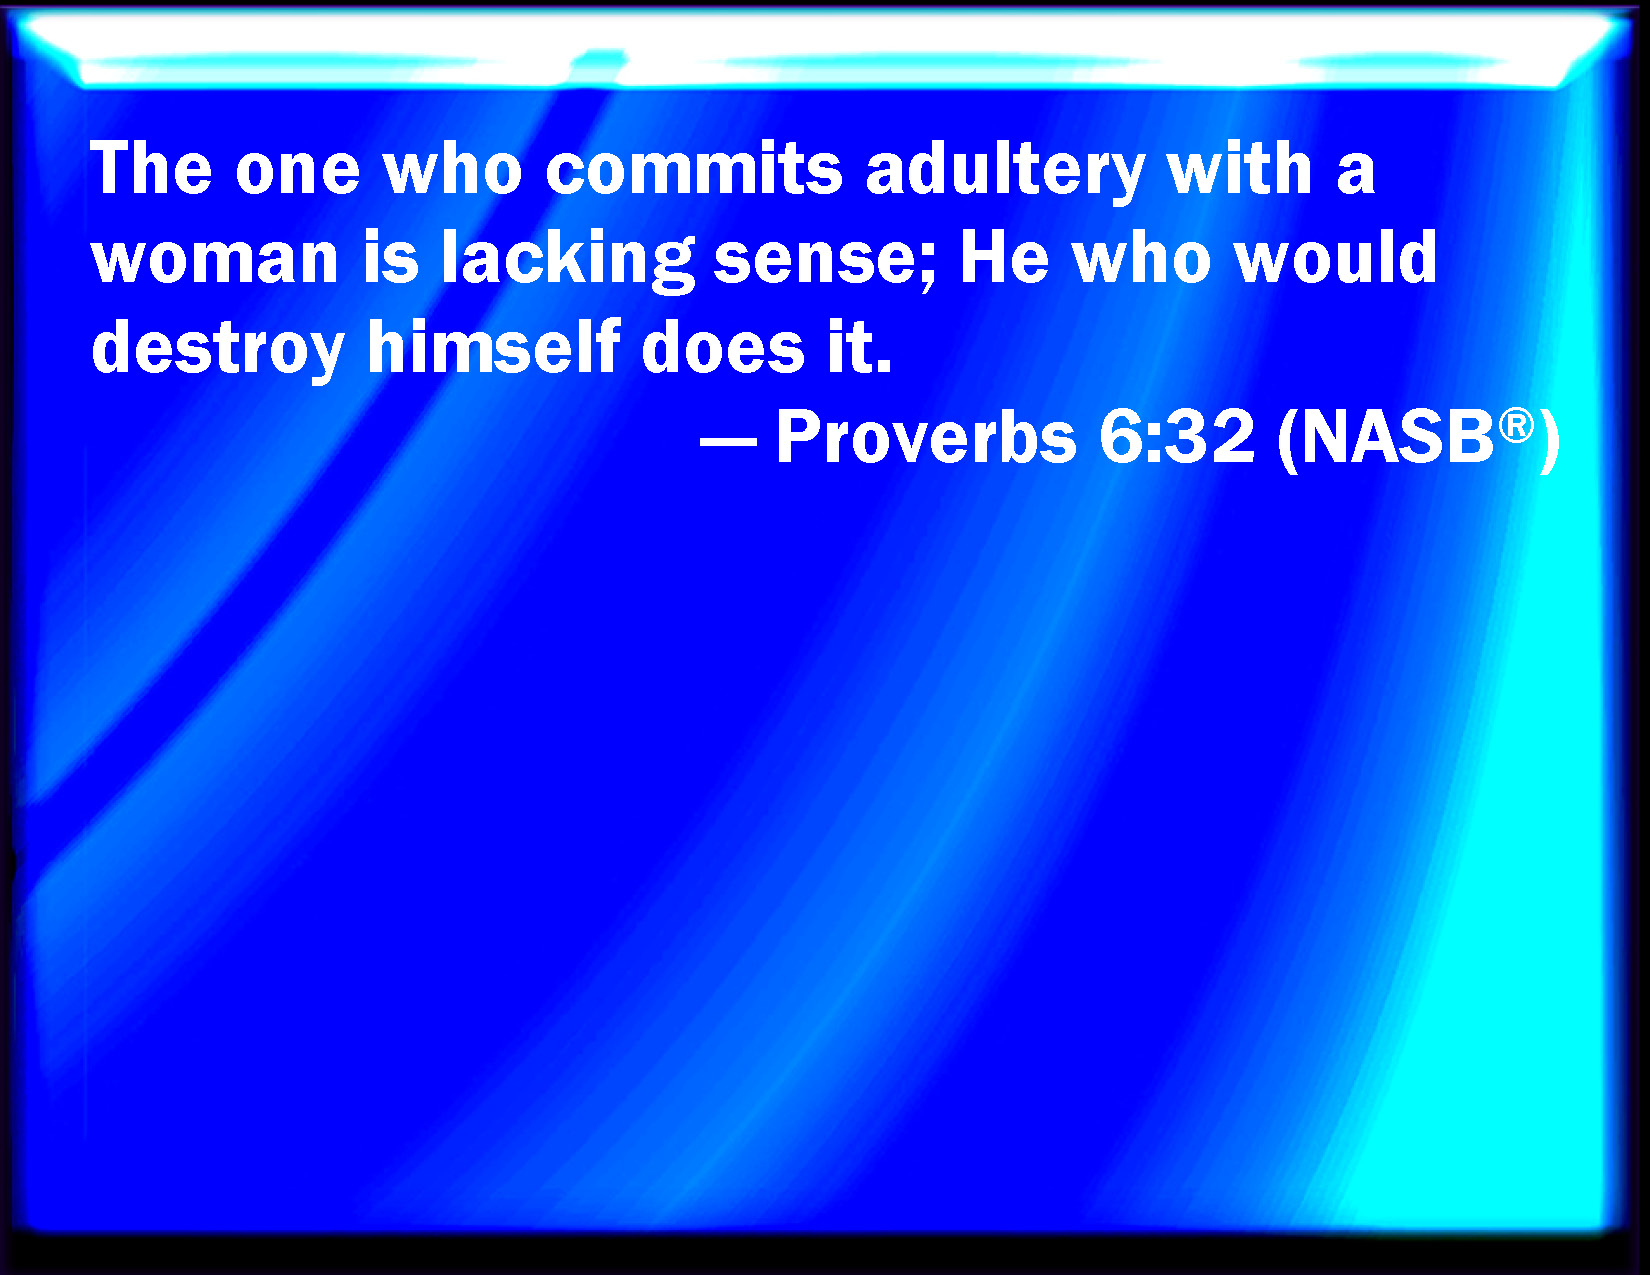 Proverbs 632 But Whoever Commits Adultery With A Woman Lacks